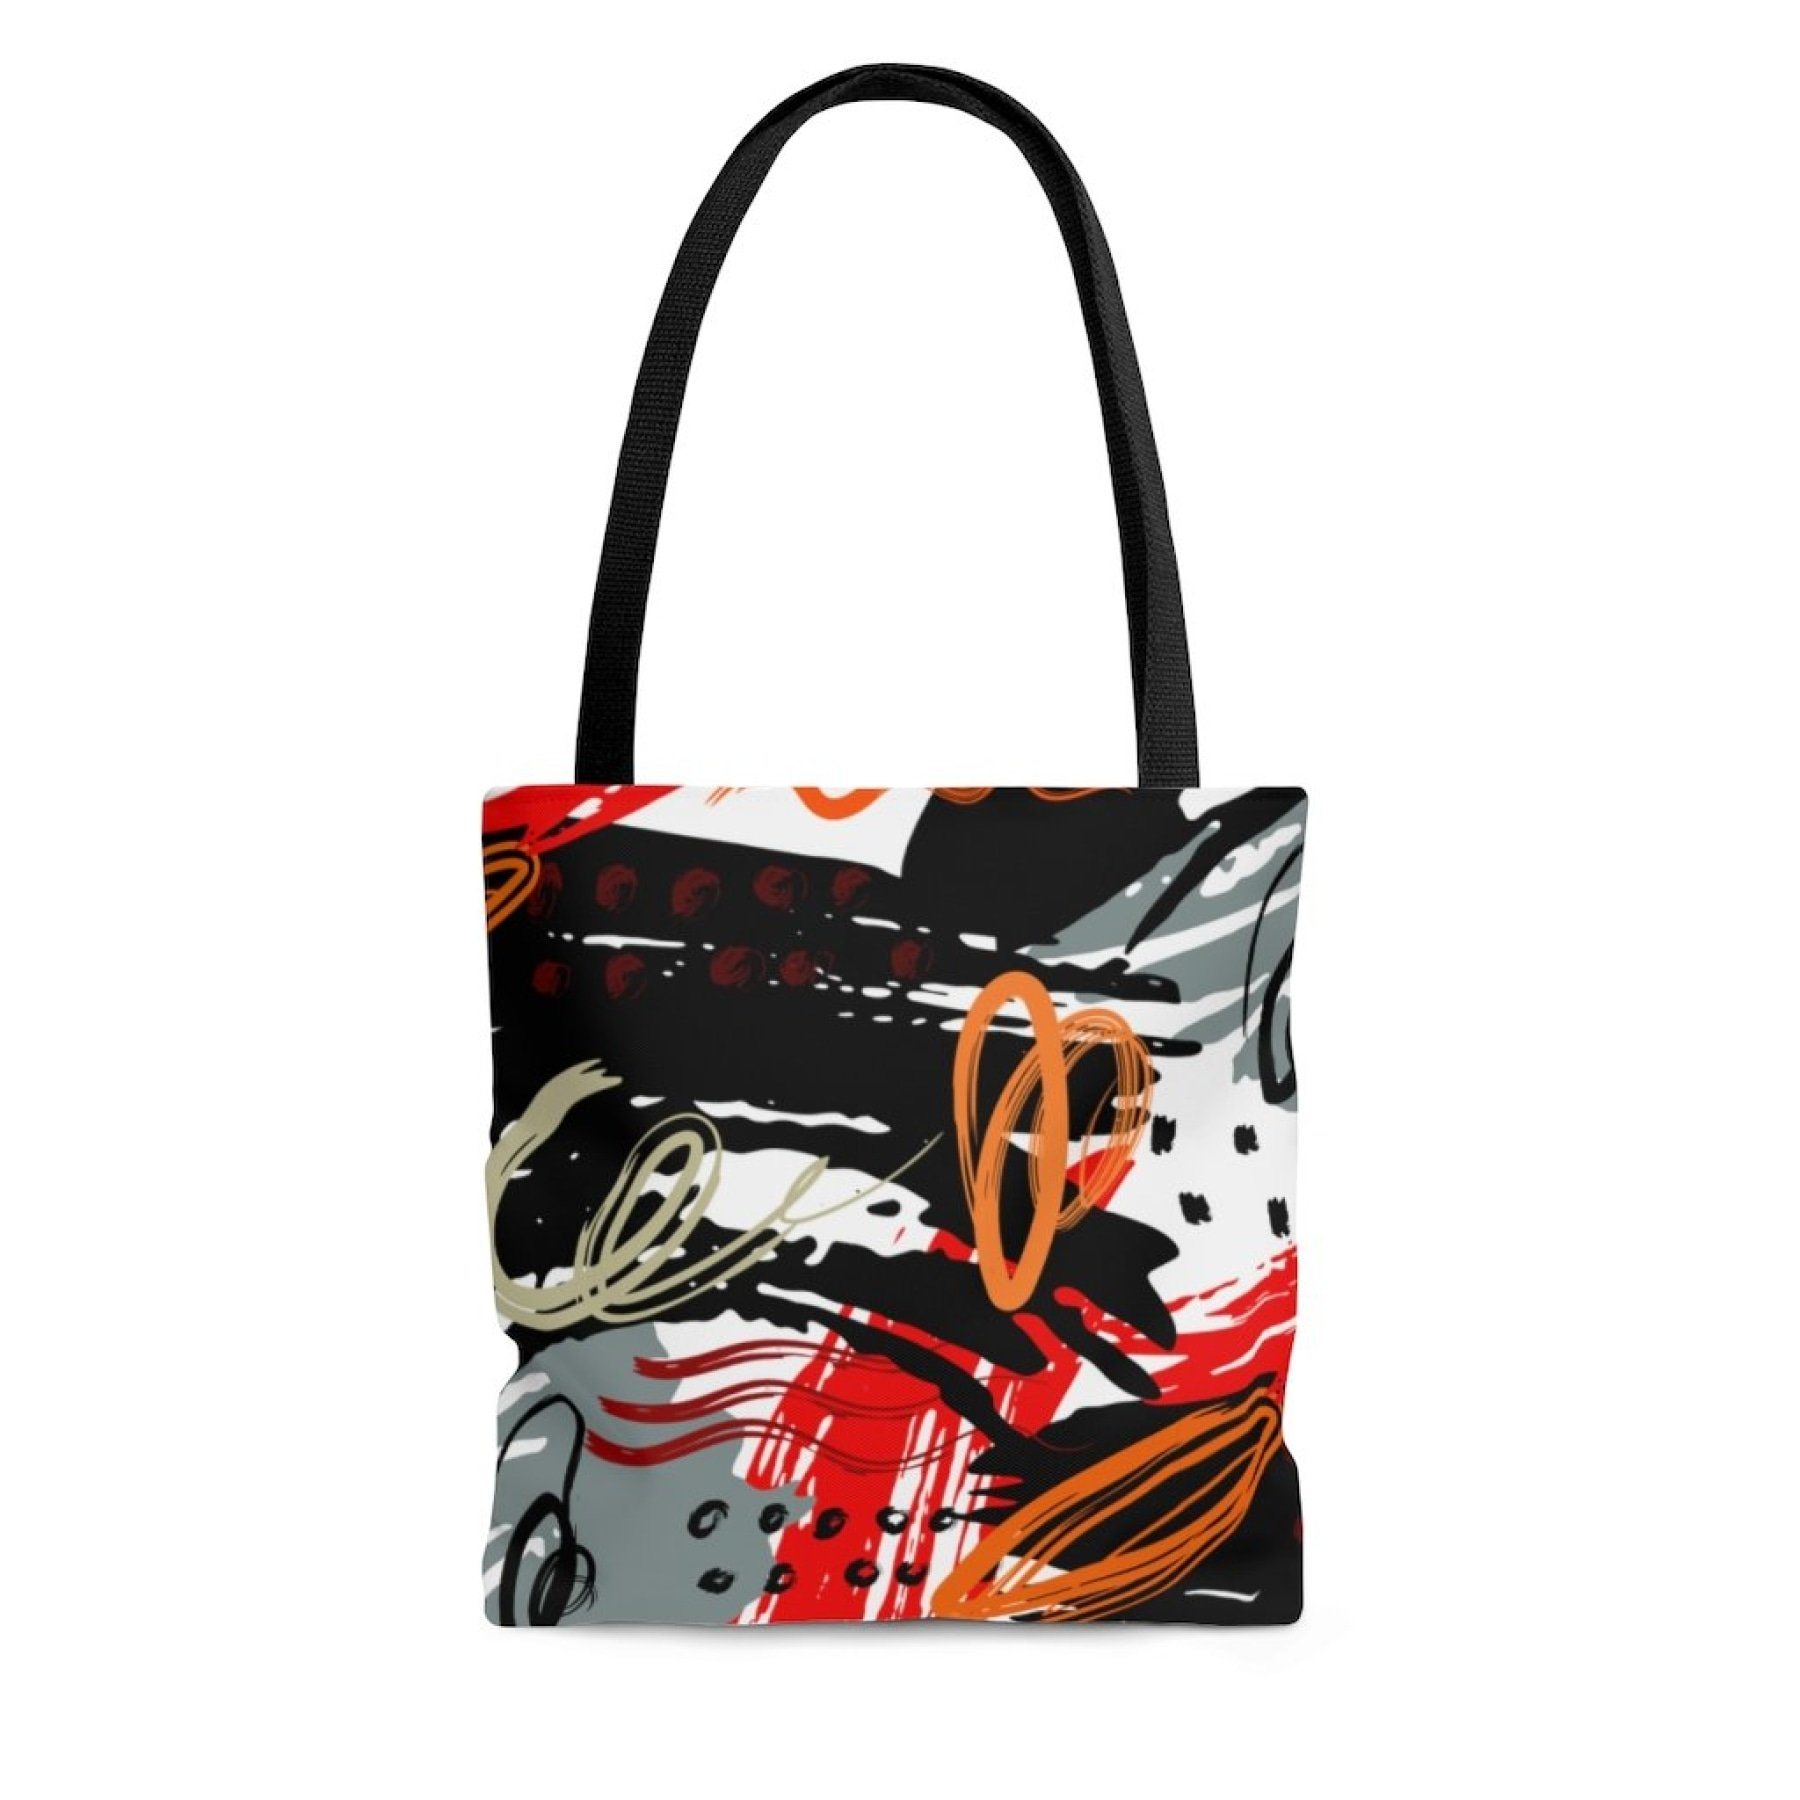 Canvas Tote Bags, Black Red Gray Abstract Style Shoulder Bag 8